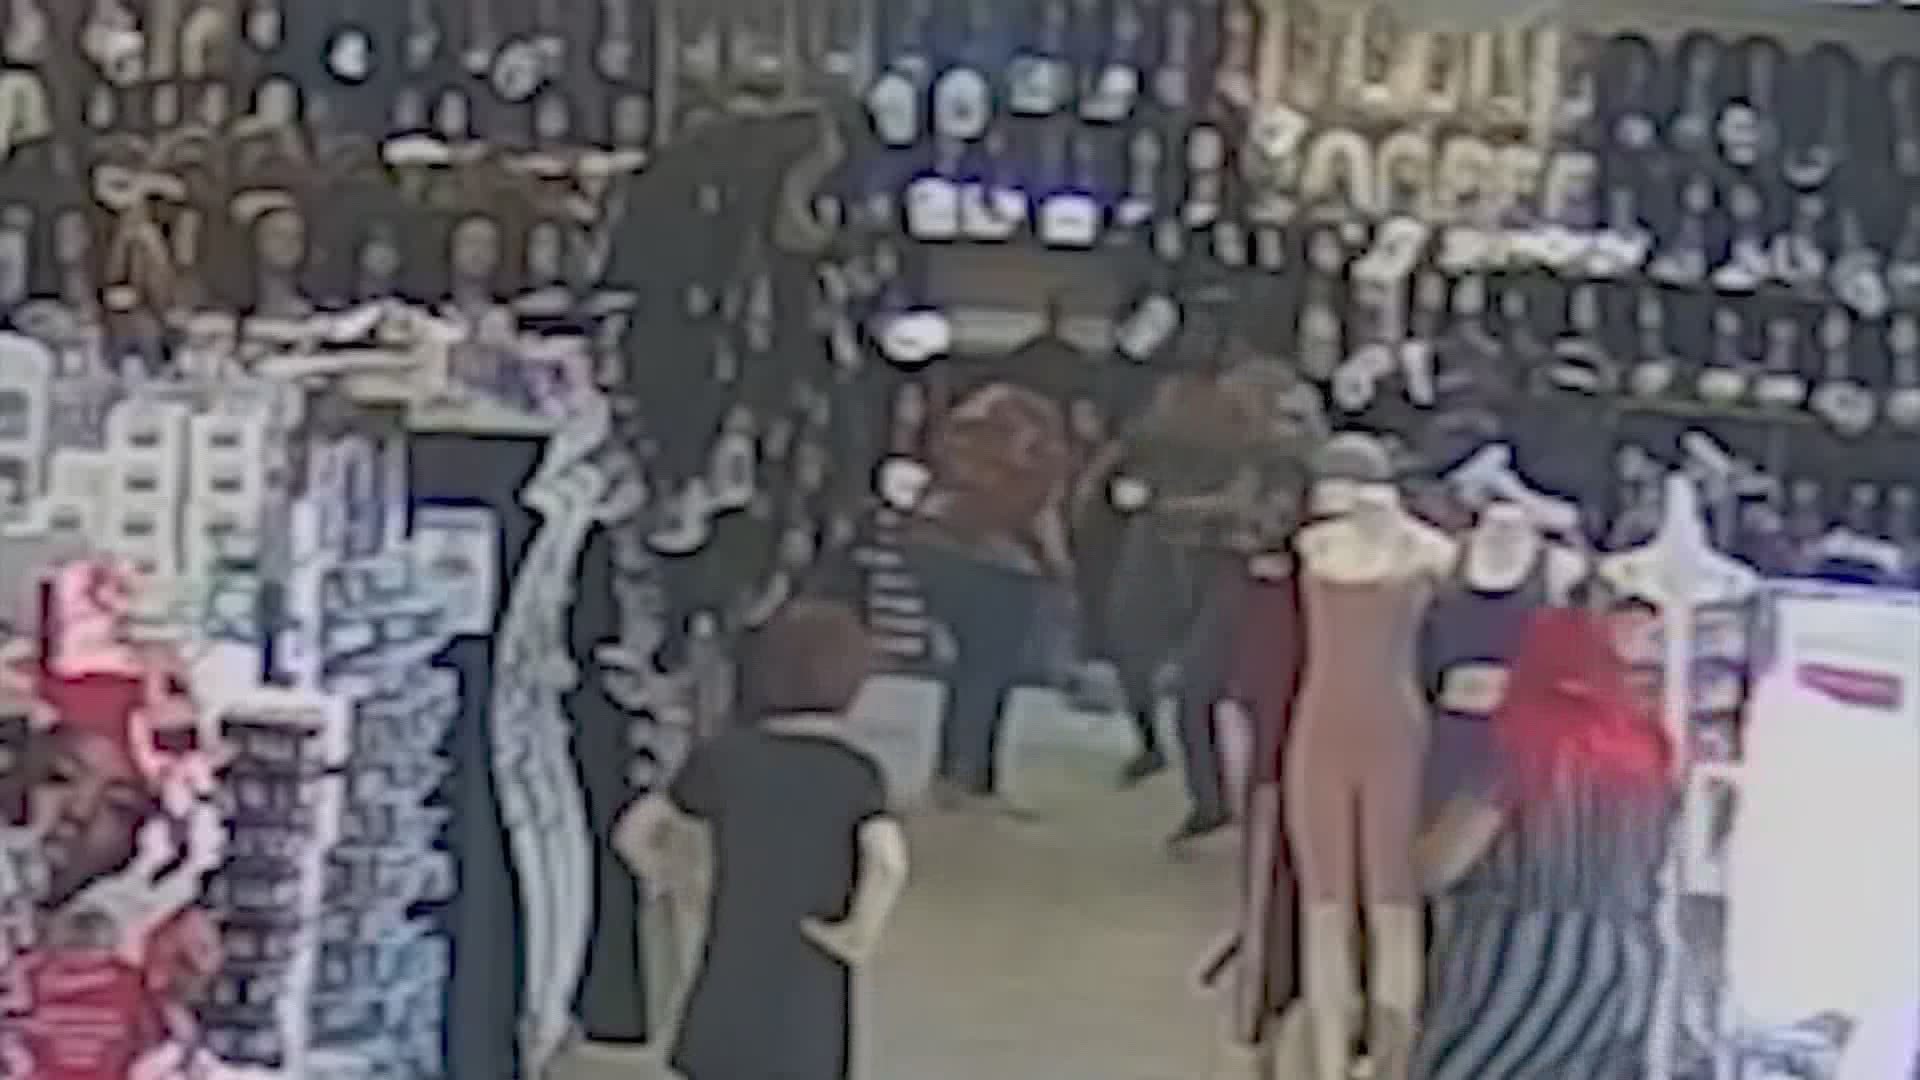 The violent attack on a north Houston beauty supply store owner was a hate crime, according to a Harris County grand jury.